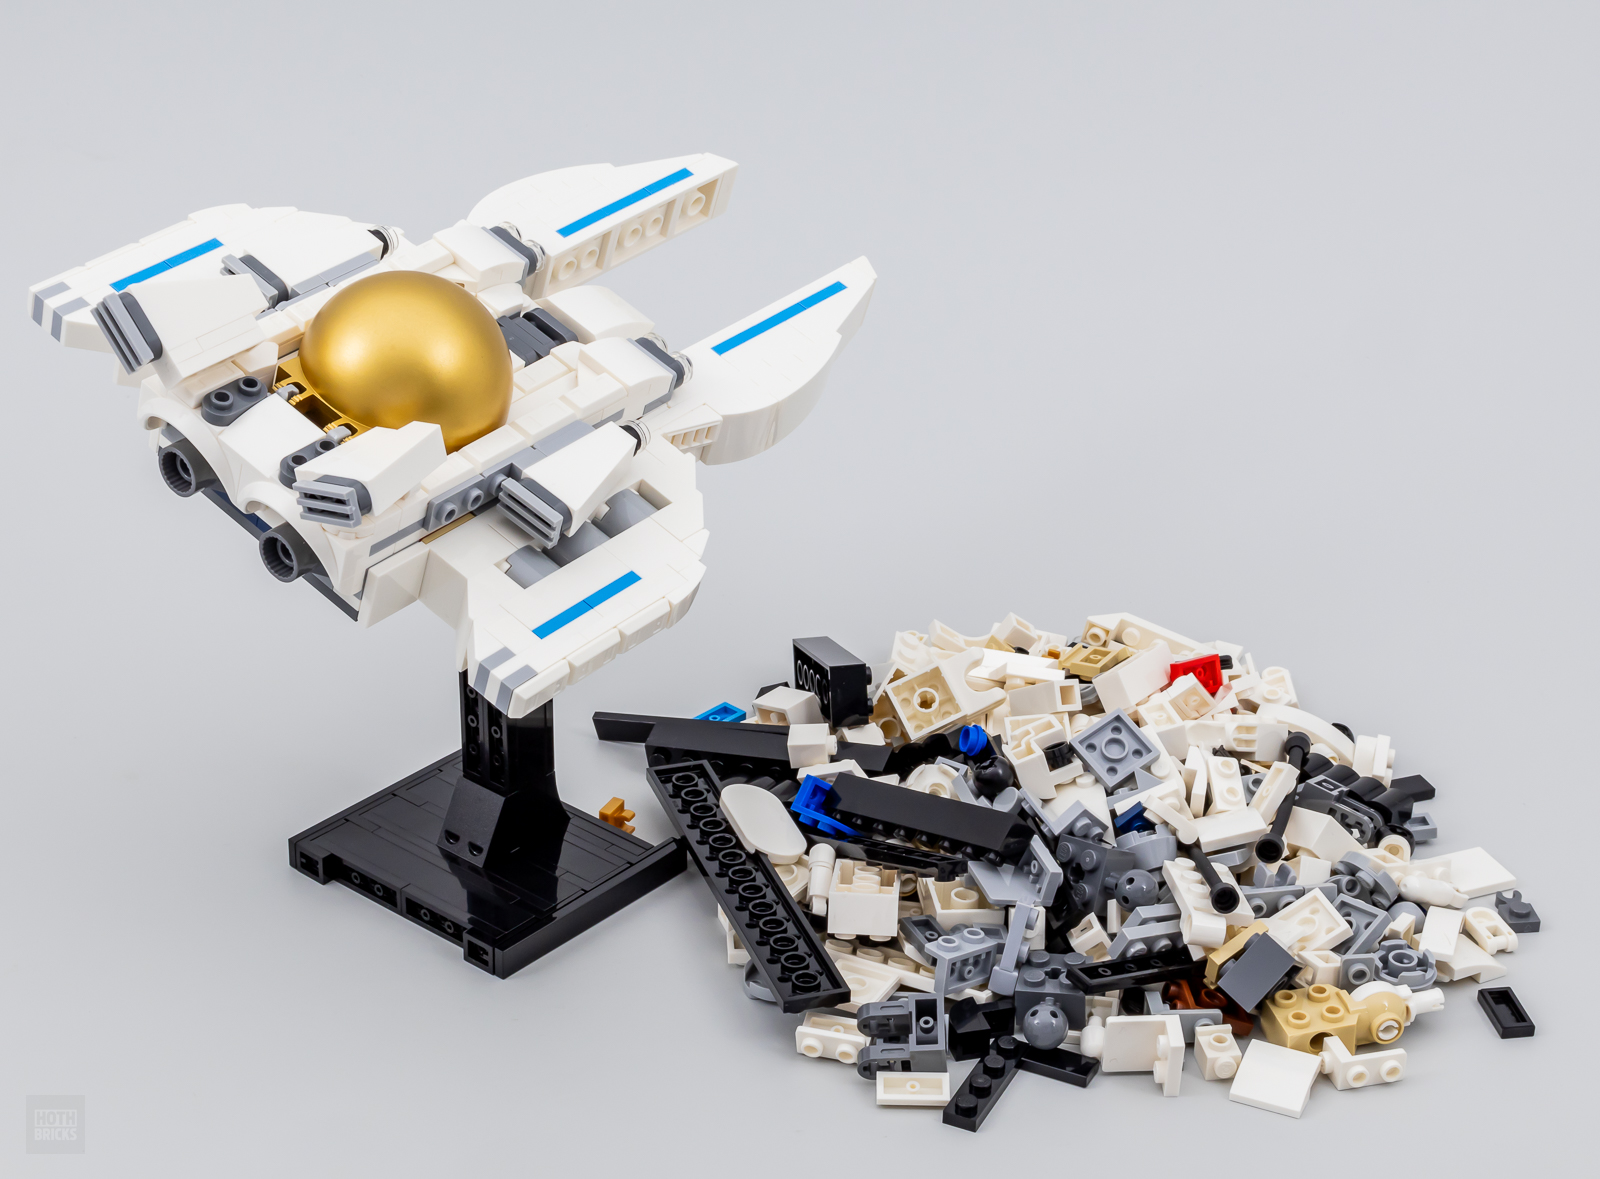 Spaceman inside 31152 Space Astronaut? : r/lego